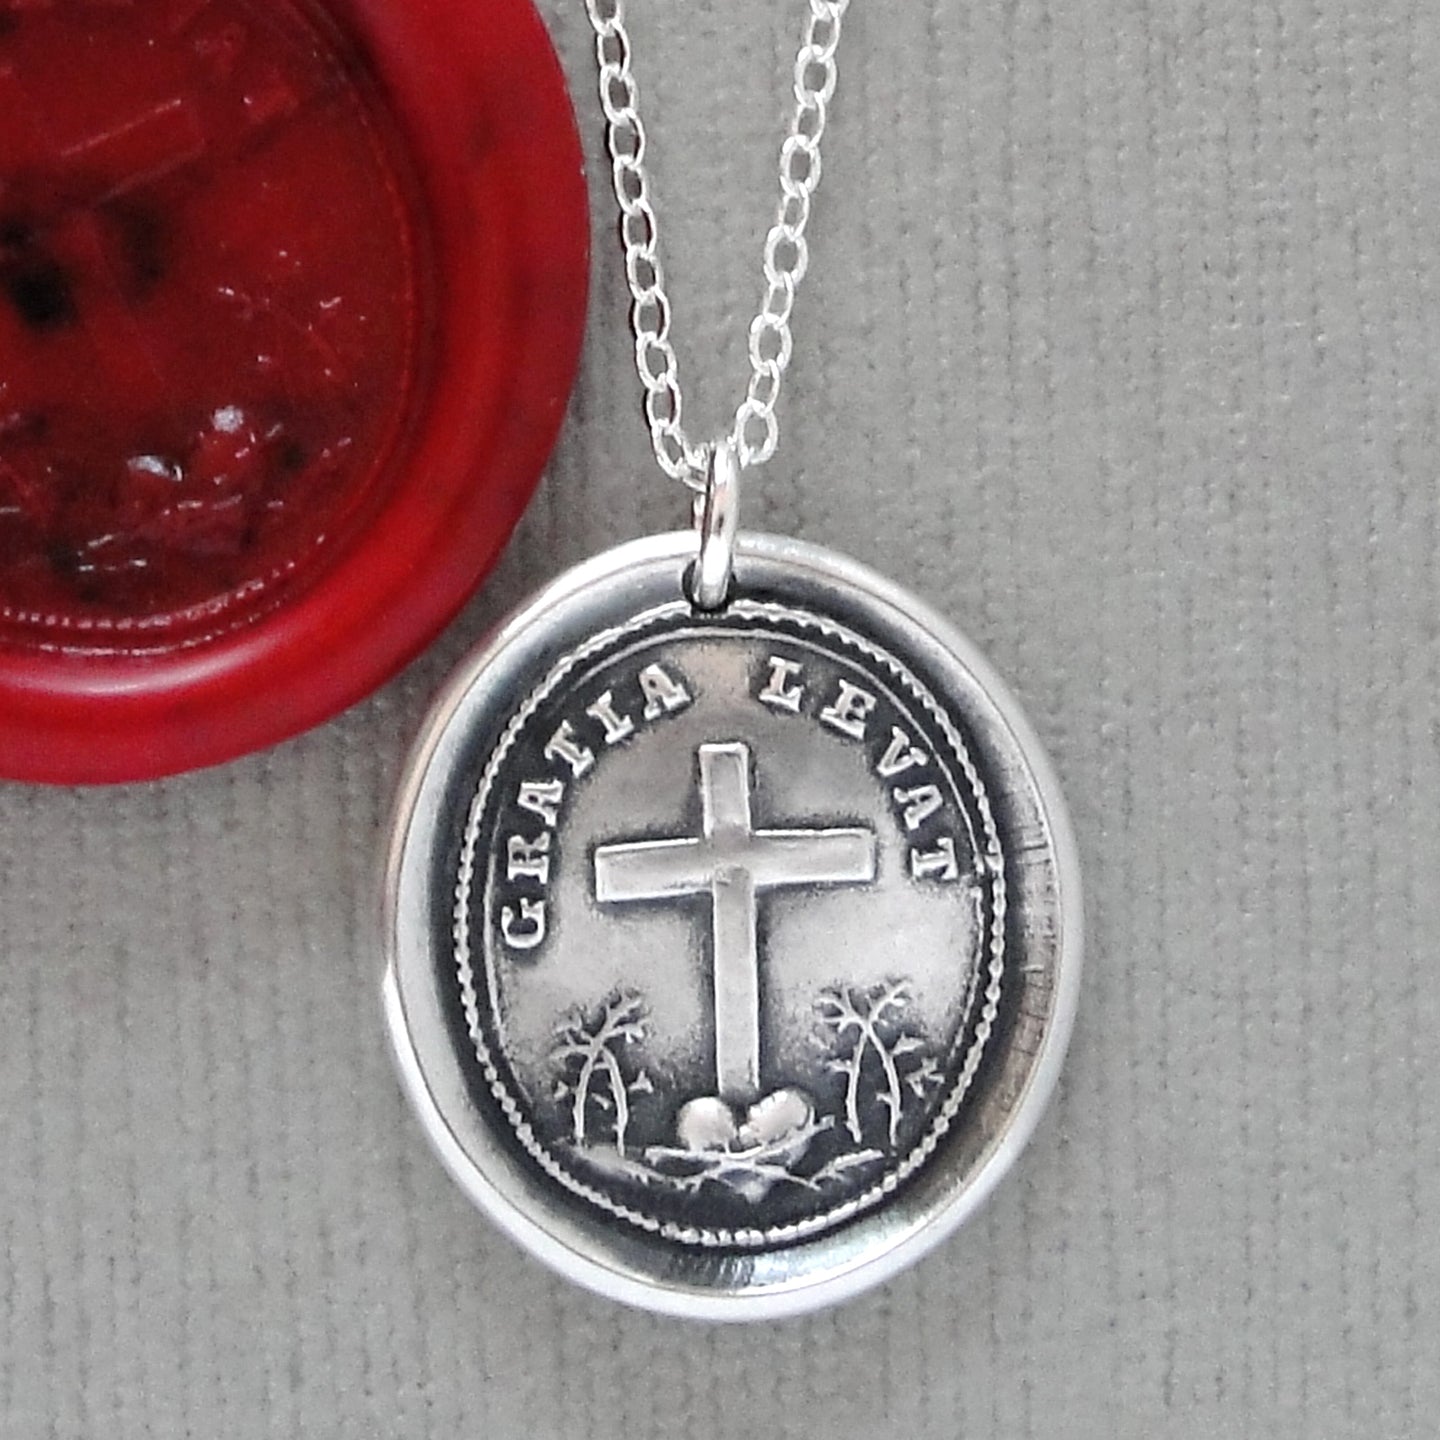 God's Grace Uplifts Wax Seal Necklace In Silver - Antique Wax Seal Jewelry Latin Motto Cross Heart Faith